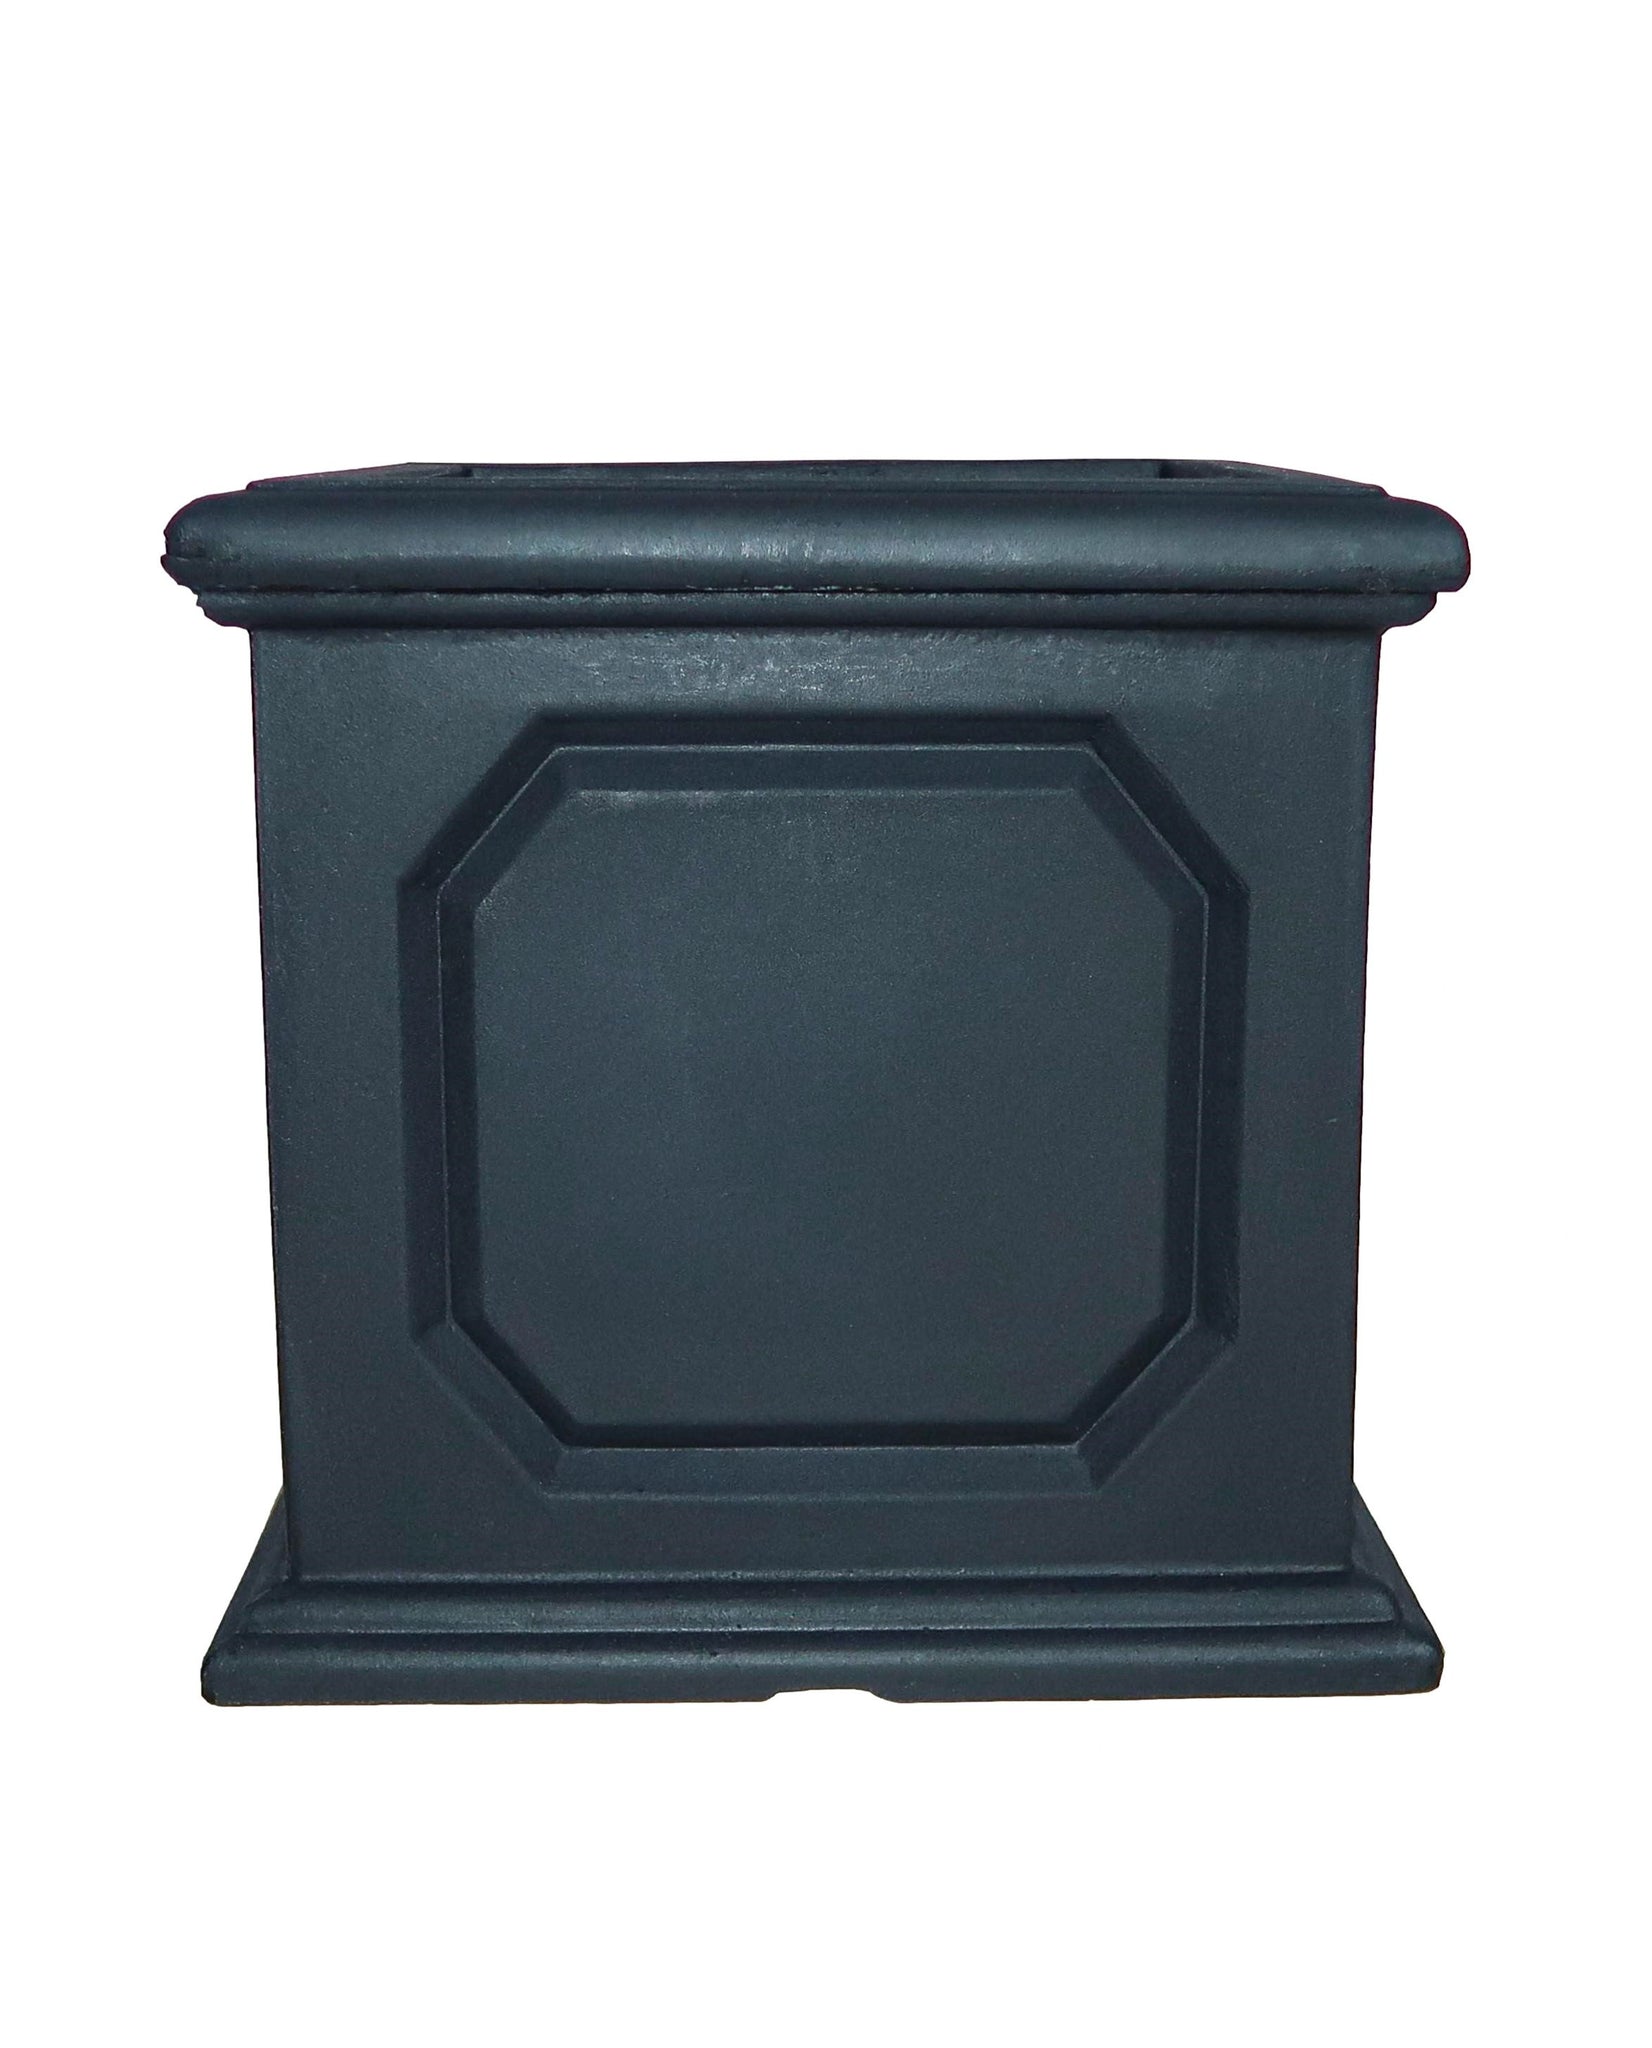 On trend, modern classic versailles cube planter, embossed design, colour Lead (black) Florastyle by Hingham.